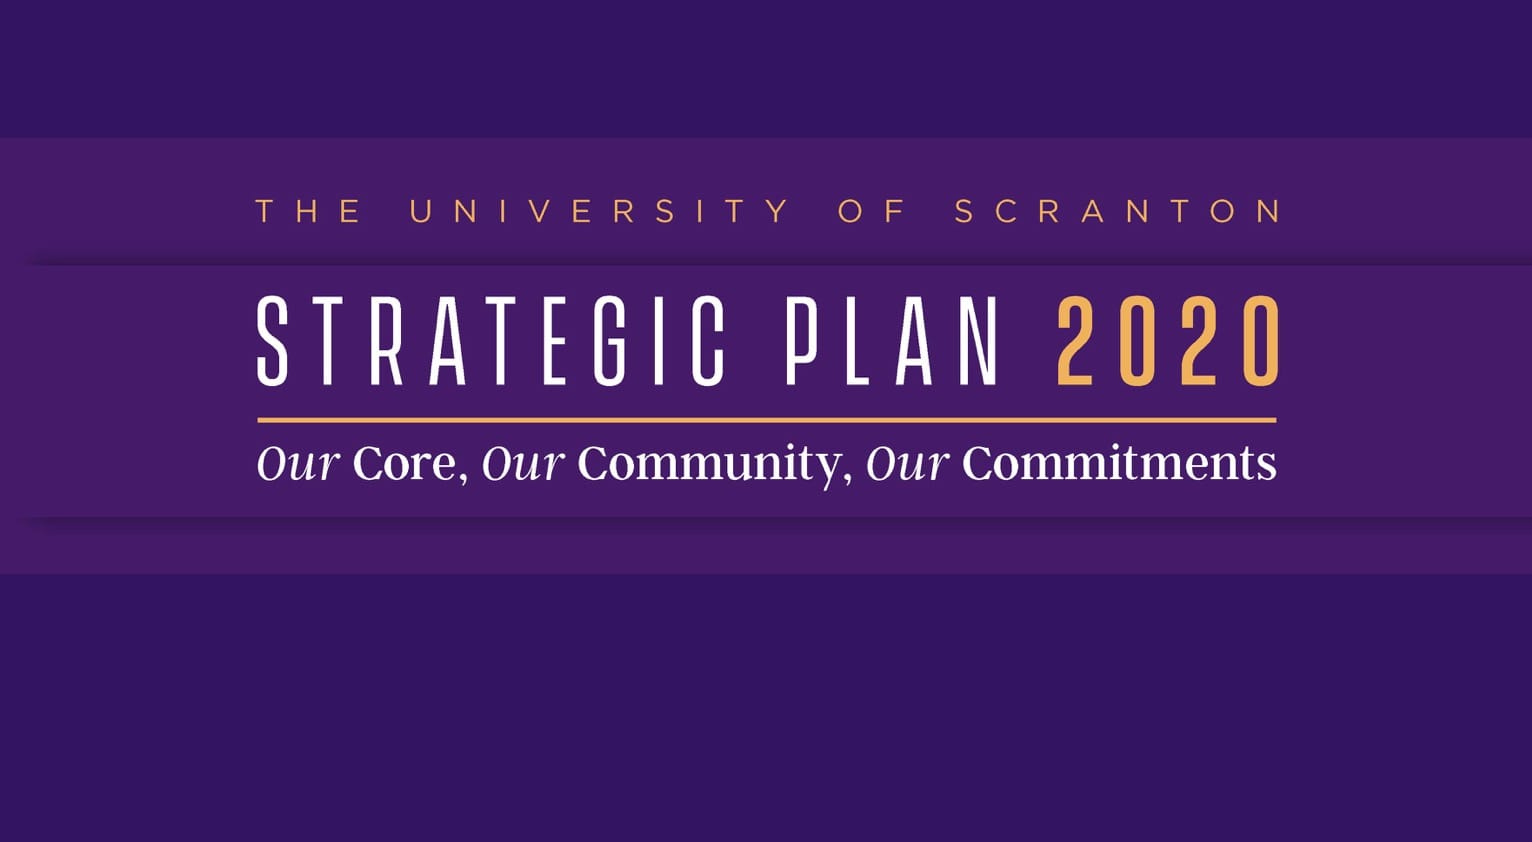 Details and information about The University of Scranton 2020-2025 Strategic Plan can be found at www.scranton.edu/strategicplan.